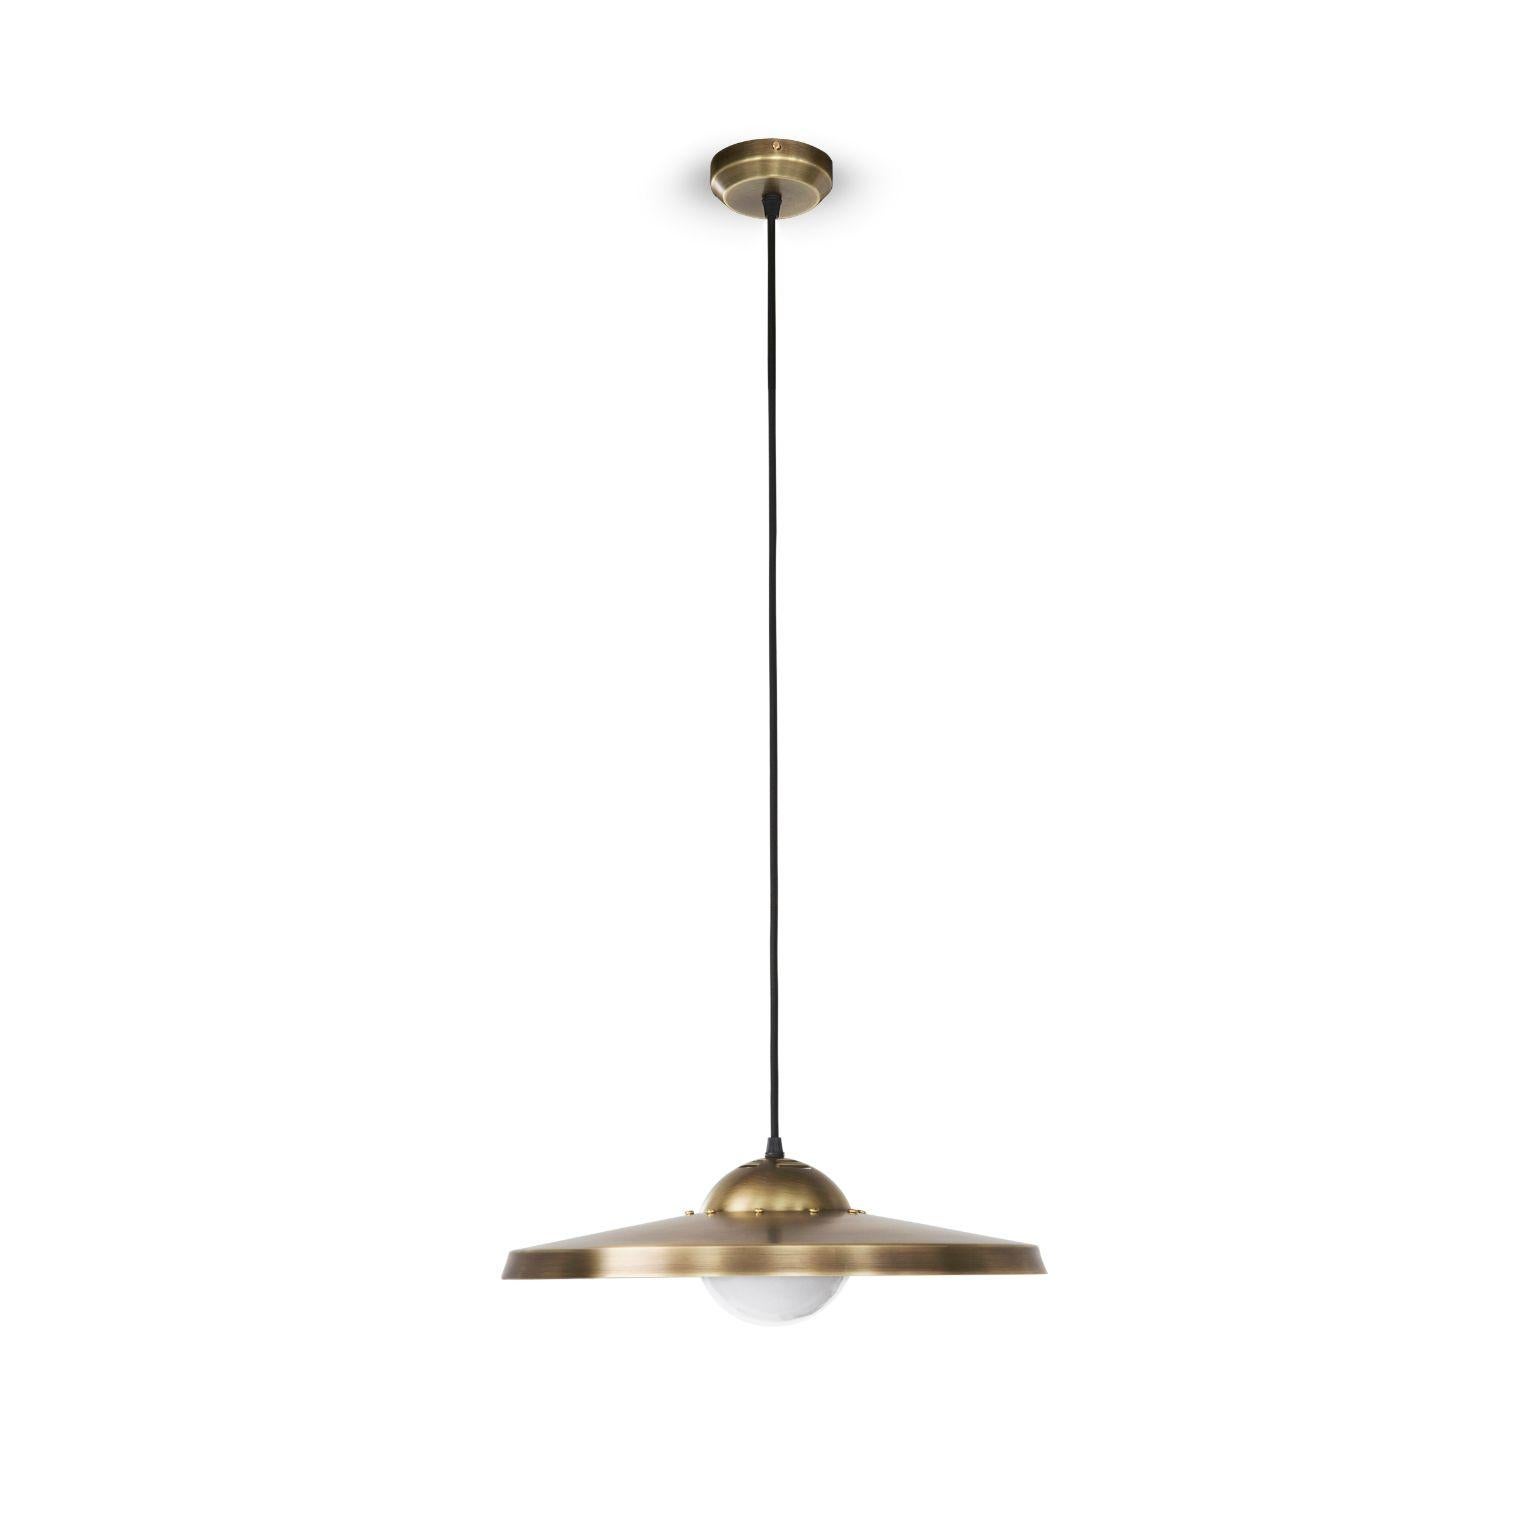 Sedge pendant light by Bert Frank
Dimensions: 42 x 13 x 100 cm
Materials: Brass

When Adam Yeats and Robbie Llewellyn founded Bert Frank in 2013 it was a meeting of minds and the start of a collaborative creative partnership with engineering at